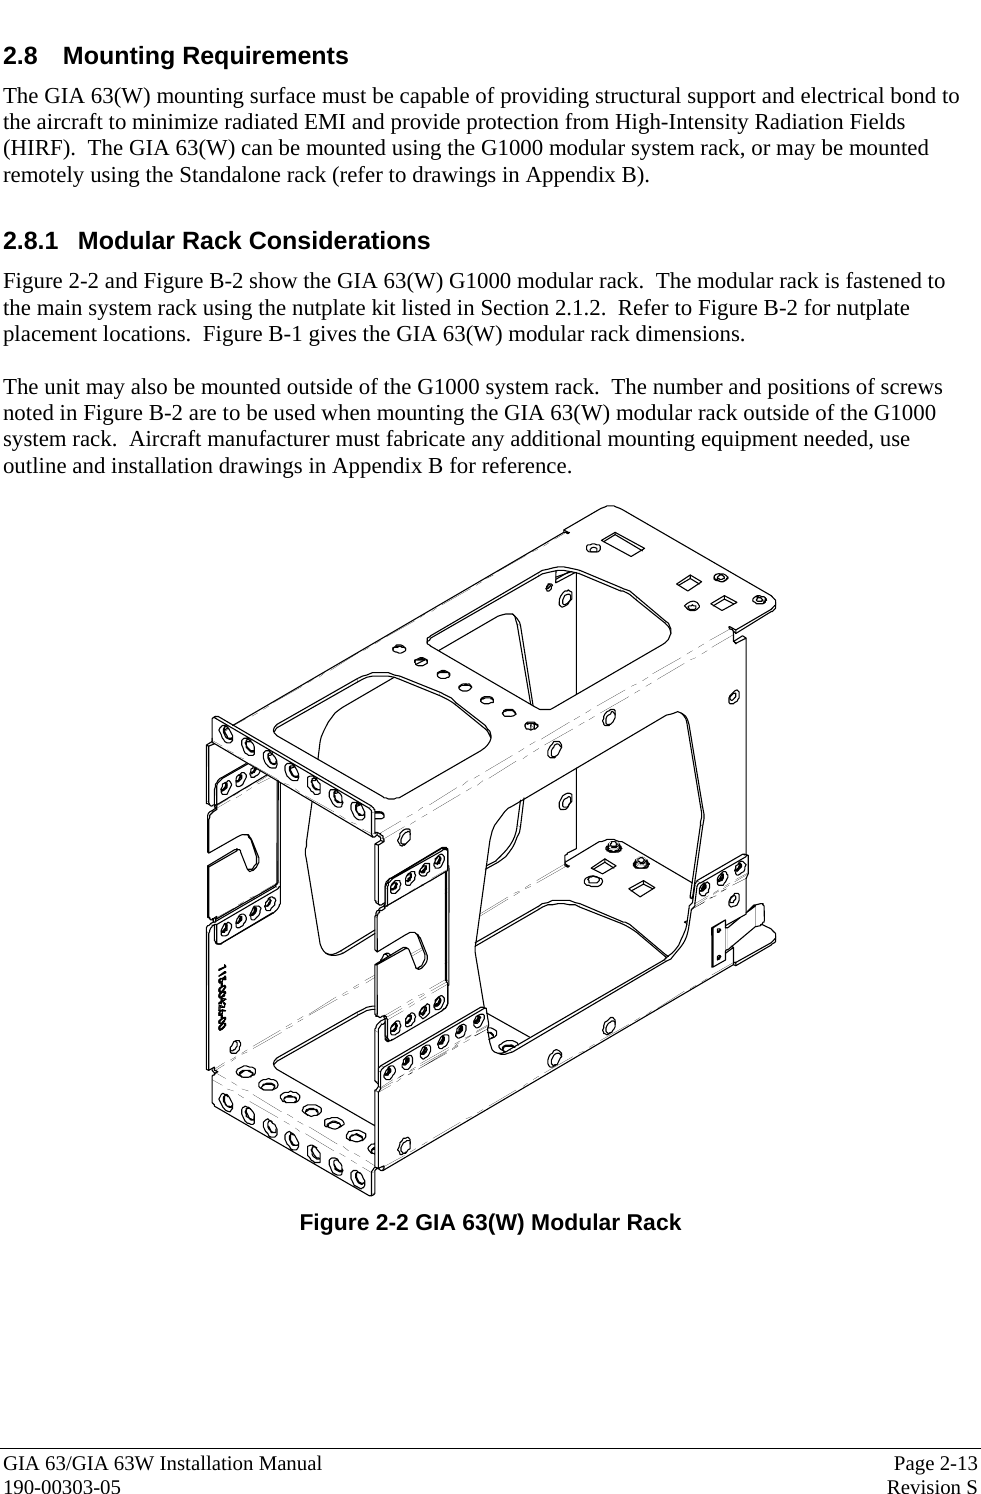  GIA 63/GIA 63W Installation Manual  Page 2-13 190-00303-05  Revision S 2.8 Mounting Requirements The GIA 63(W) mounting surface must be capable of providing structural support and electrical bond to the aircraft to minimize radiated EMI and provide protection from High-Intensity Radiation Fields (HIRF).  The GIA 63(W) can be mounted using the G1000 modular system rack, or may be mounted remotely using the Standalone rack (refer to drawings in Appendix B).  2.8.1  Modular Rack Considerations Figure 2-2 and Figure B-2 show the GIA 63(W) G1000 modular rack.  The modular rack is fastened to the main system rack using the nutplate kit listed in Section 2.1.2.  Refer to Figure B-2 for nutplate placement locations.  Figure B-1 gives the GIA 63(W) modular rack dimensions.    The unit may also be mounted outside of the G1000 system rack.  The number and positions of screws noted in Figure B-2 are to be used when mounting the GIA 63(W) modular rack outside of the G1000 system rack.  Aircraft manufacturer must fabricate any additional mounting equipment needed, use outline and installation drawings in Appendix B for reference.   Figure 2-2 GIA 63(W) Modular Rack 